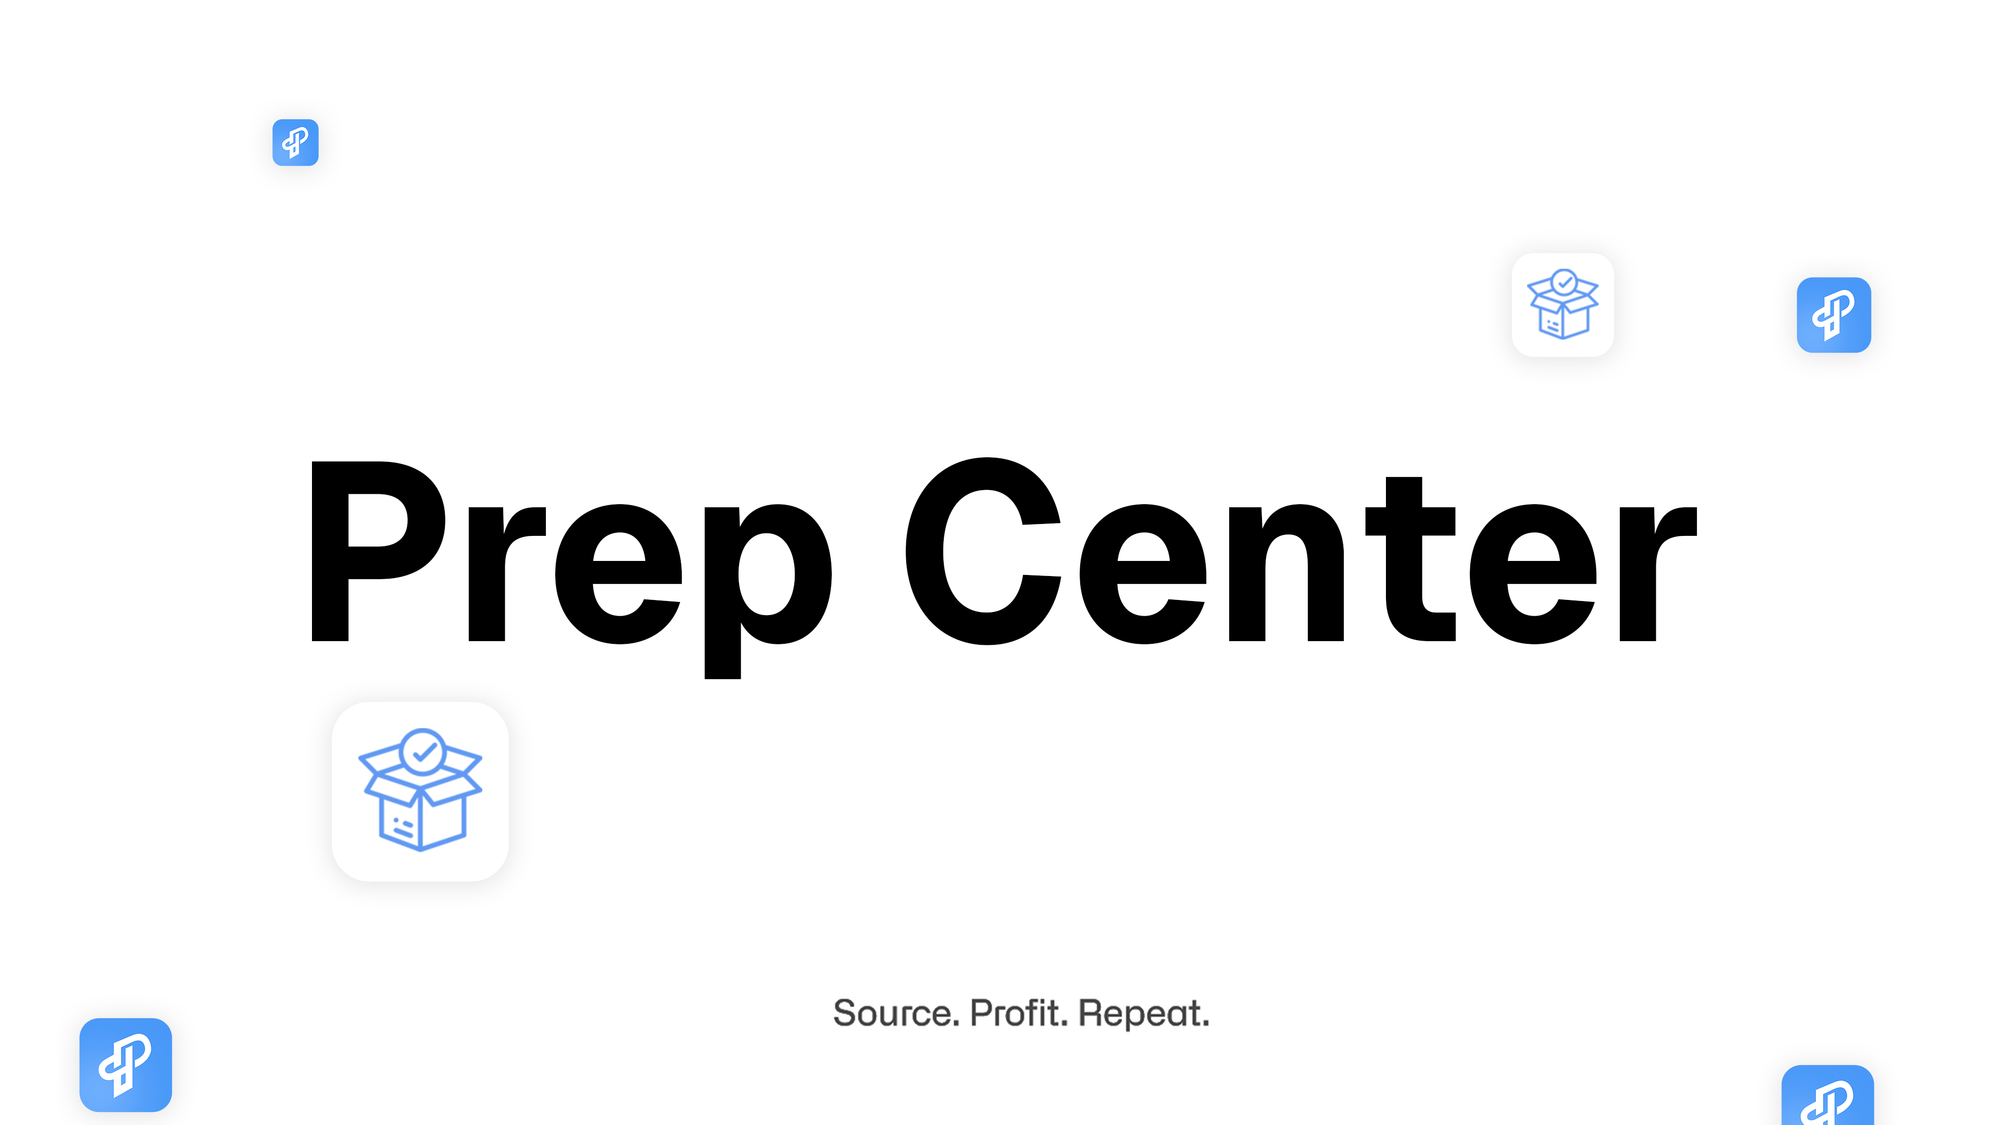 What is an Amazon FBA Prep Center and how can I use it